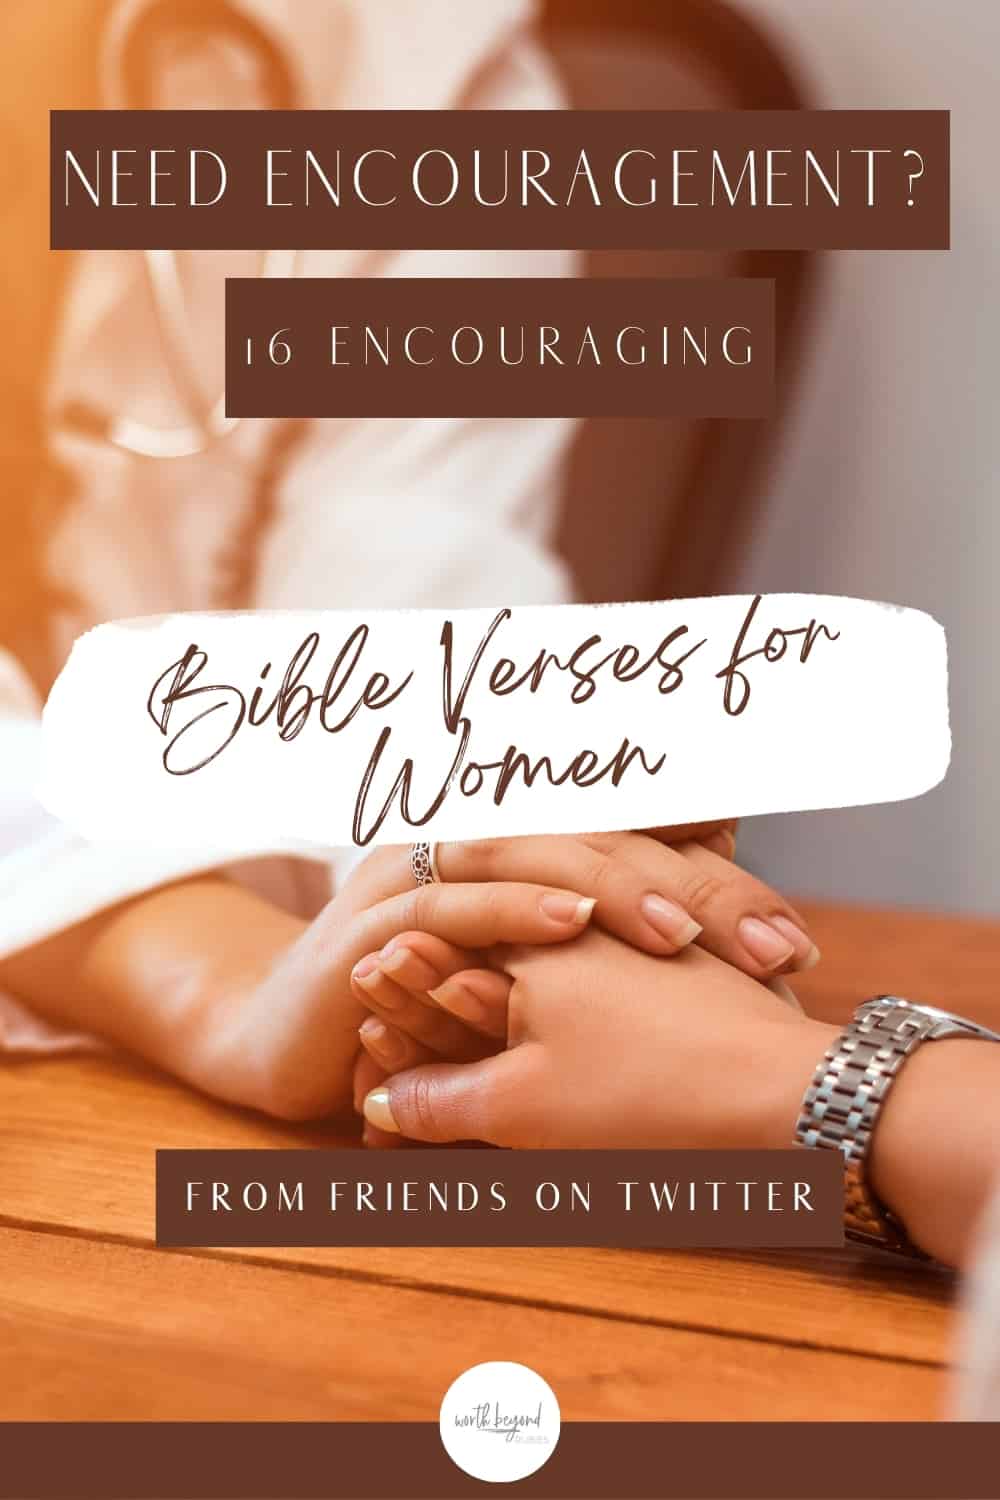 A woman holding another woman's hands across a table in support and text that says Need Encouragement? - 16 Encouraging Bible Verses for Women